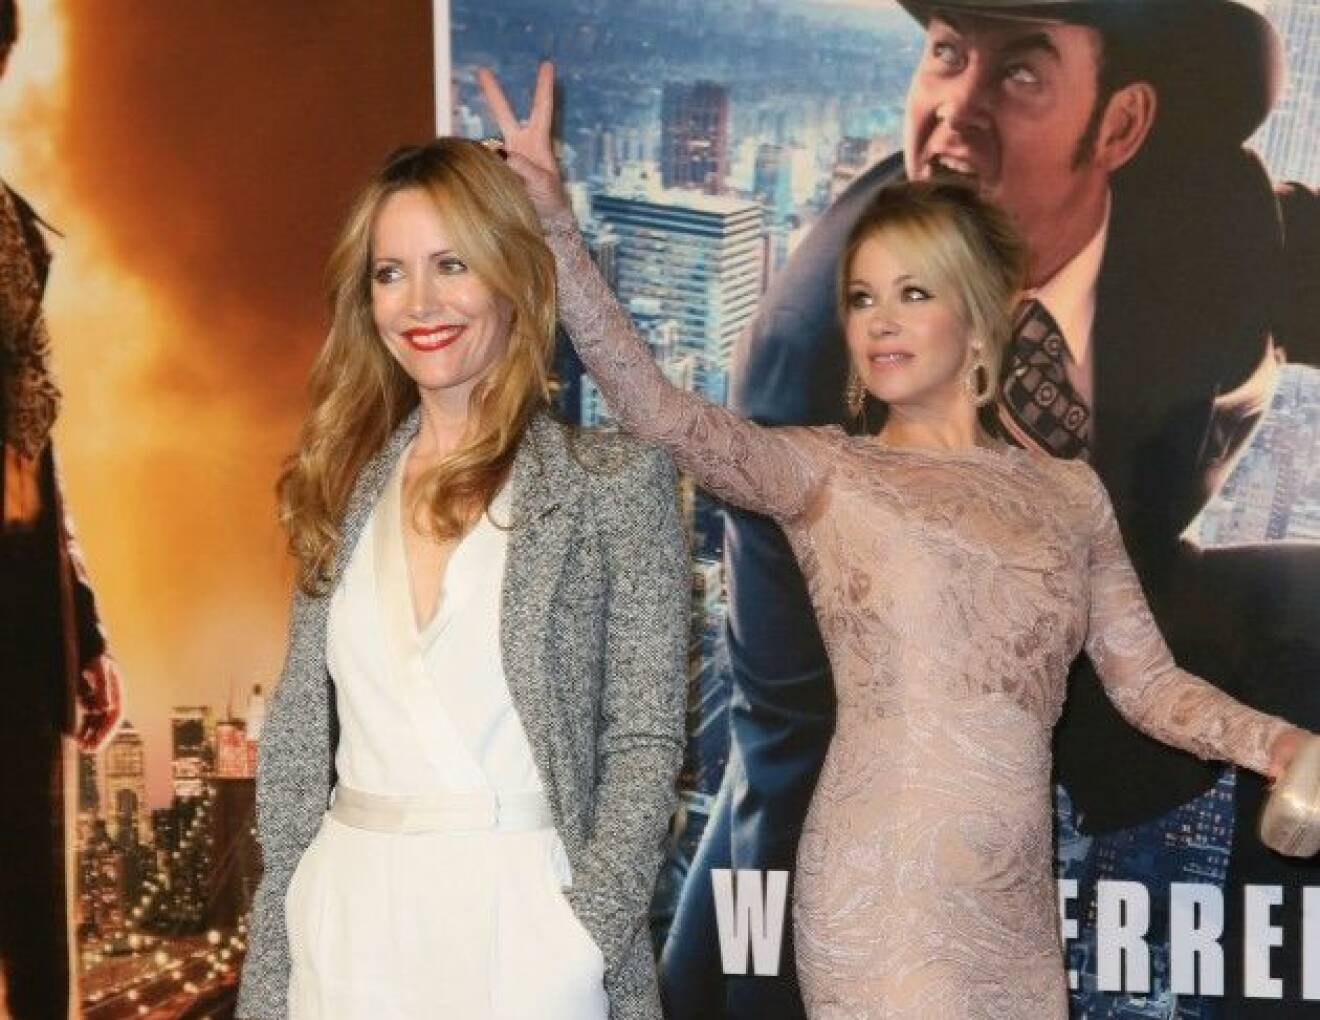 The UK Premiere of "Anchorman 2: The Legend Continues" at the Vue West EndFeaturing: Leslie Mann, Christina ApplegateWhere: London, United KingdomWhen: 11 Dec 2013Credit: James Shaw/WENN.com